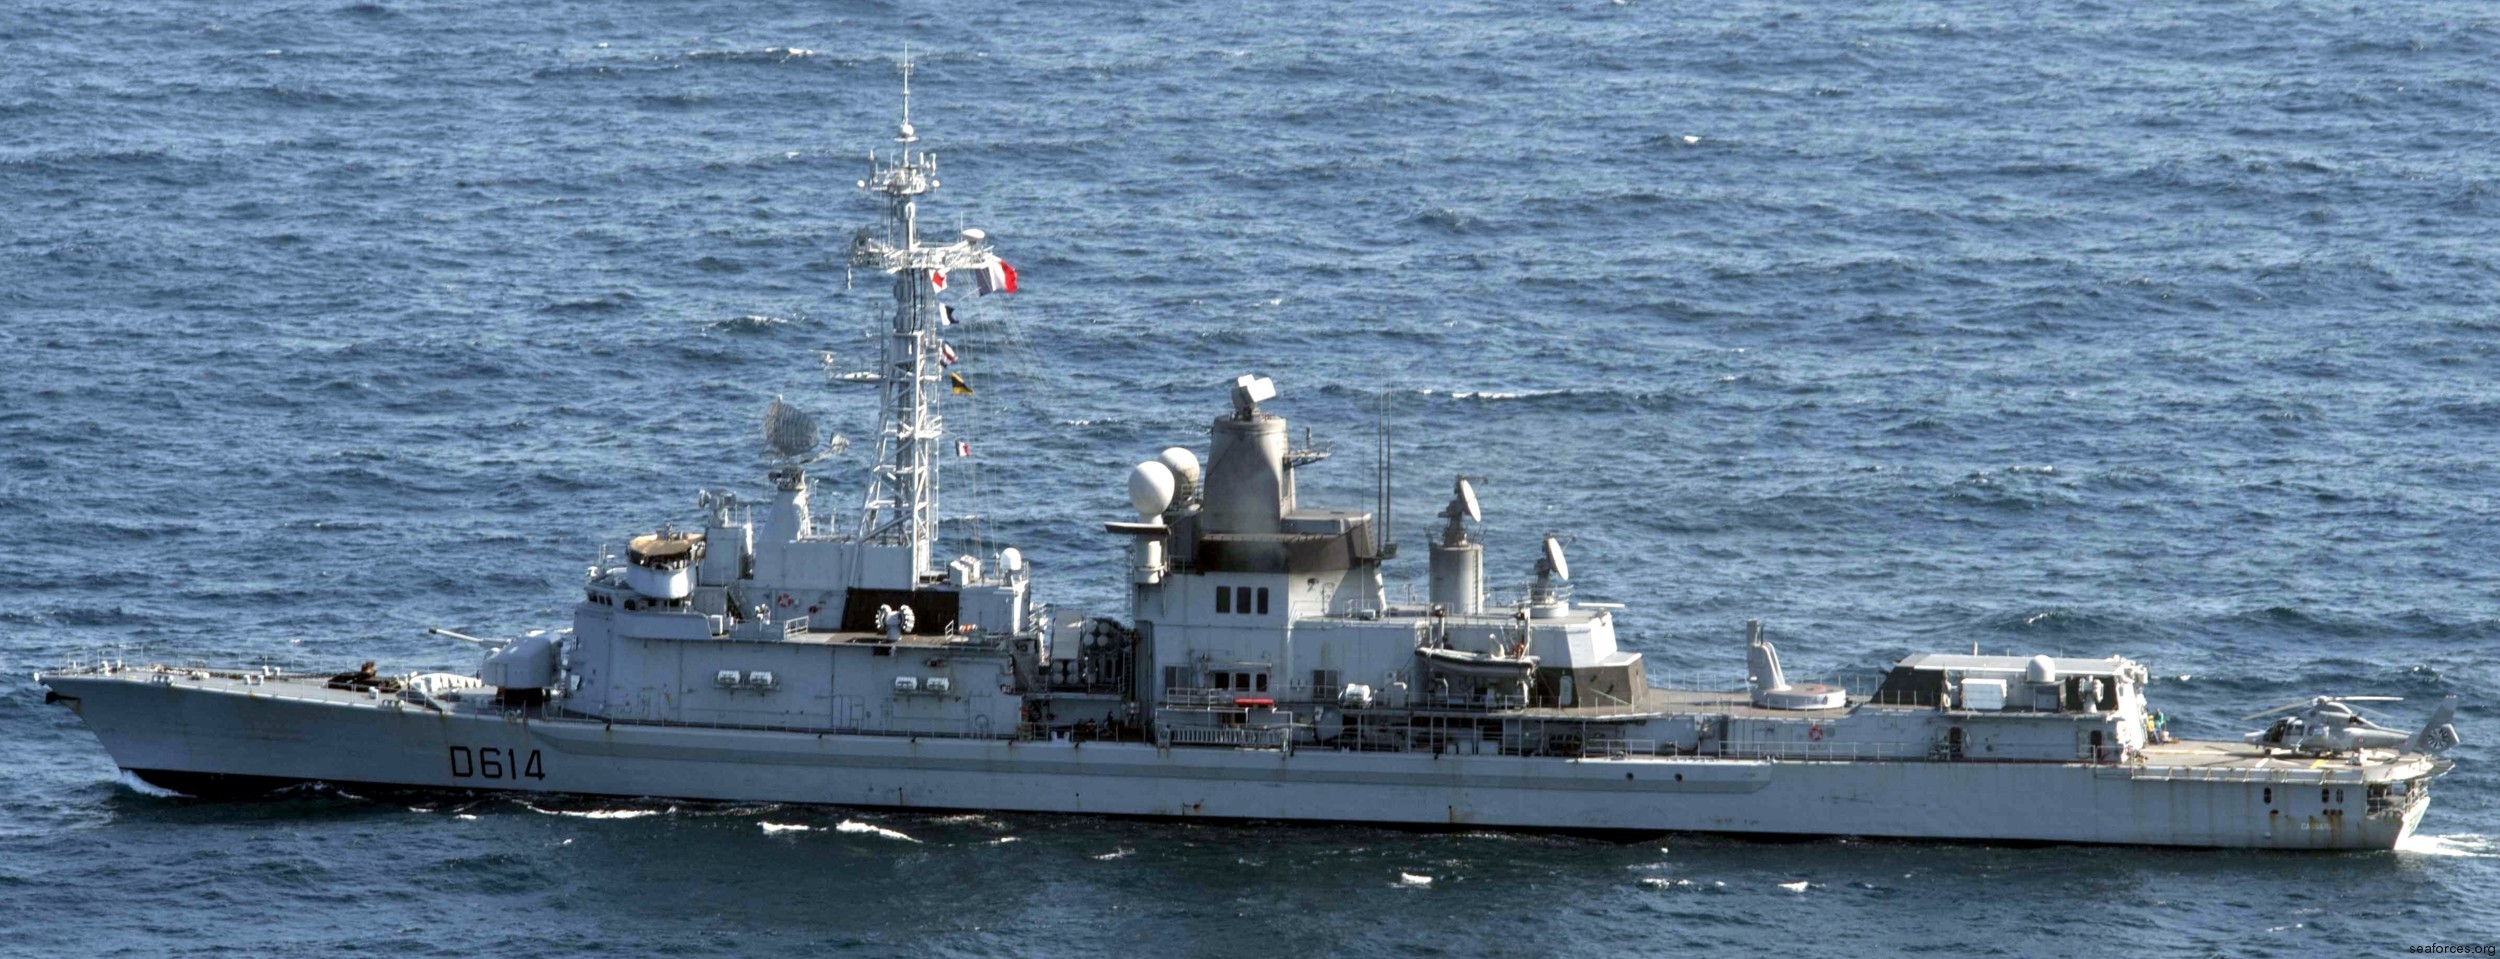 d-614 fs cassard f70aa class guided missile frigate ffgh ddg french navy marine nationale 13